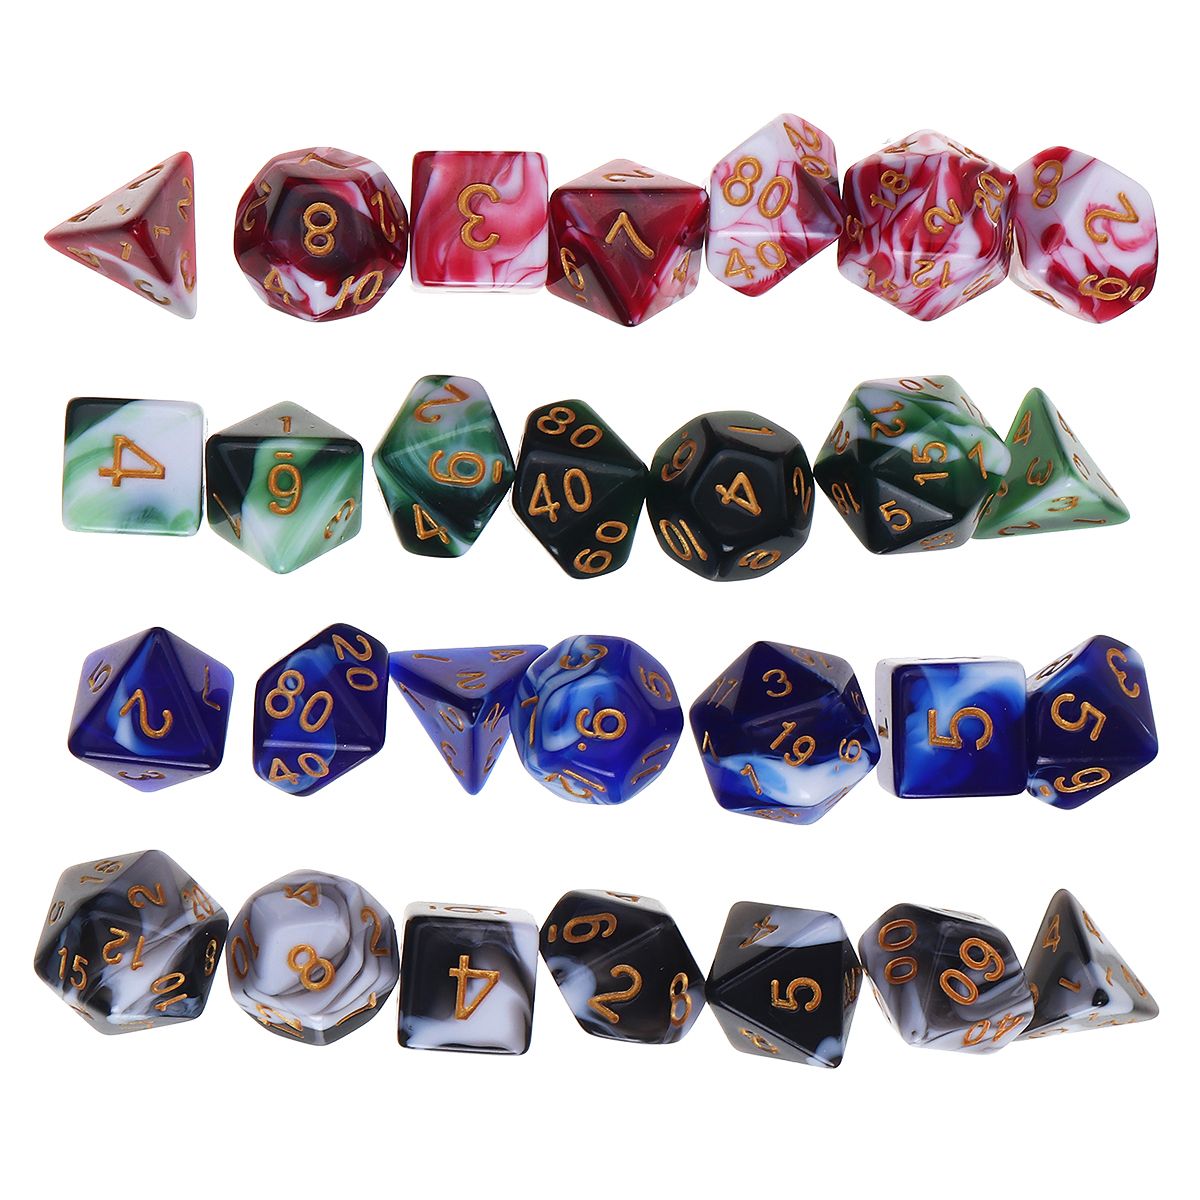 28Pcs-Multisided-Dice-Polyhedral-Dices-Set-Board-RPG-Dice-Set-4-Colors-With-4-Bags-1625887